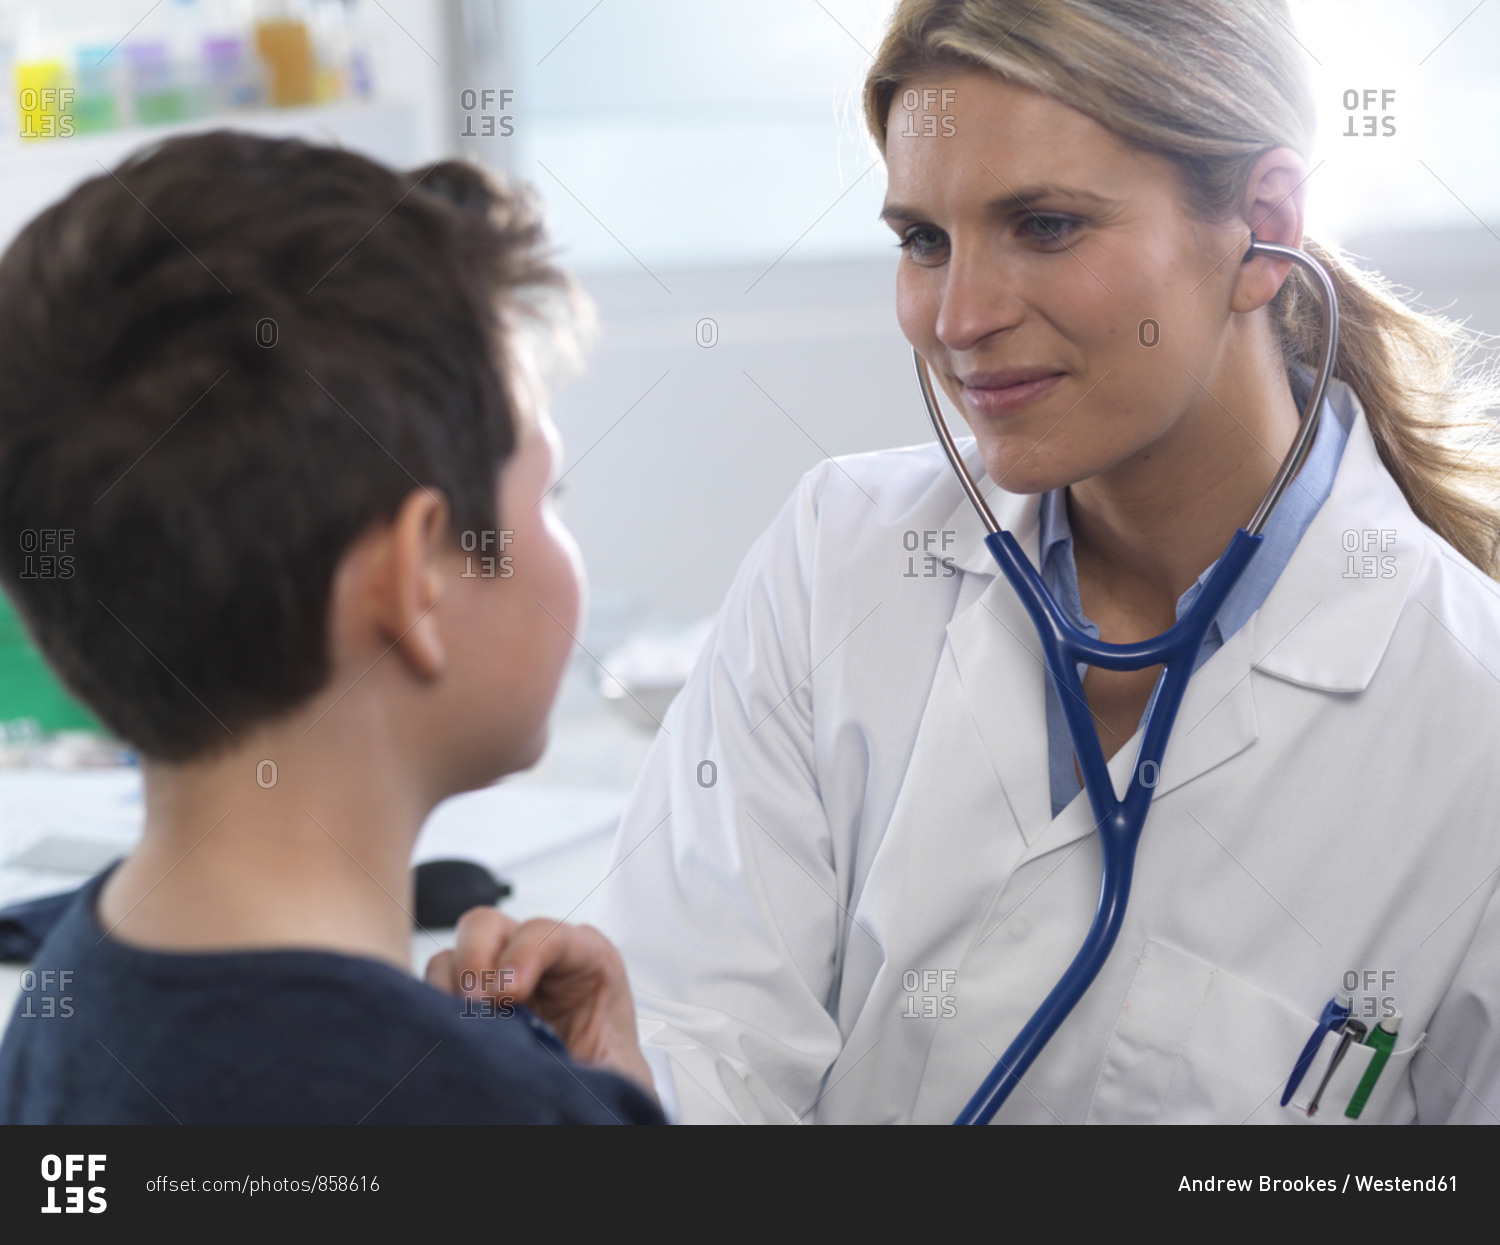 Female doctor listening to a boys heart beat using a stethoscope during a health check in a clinic